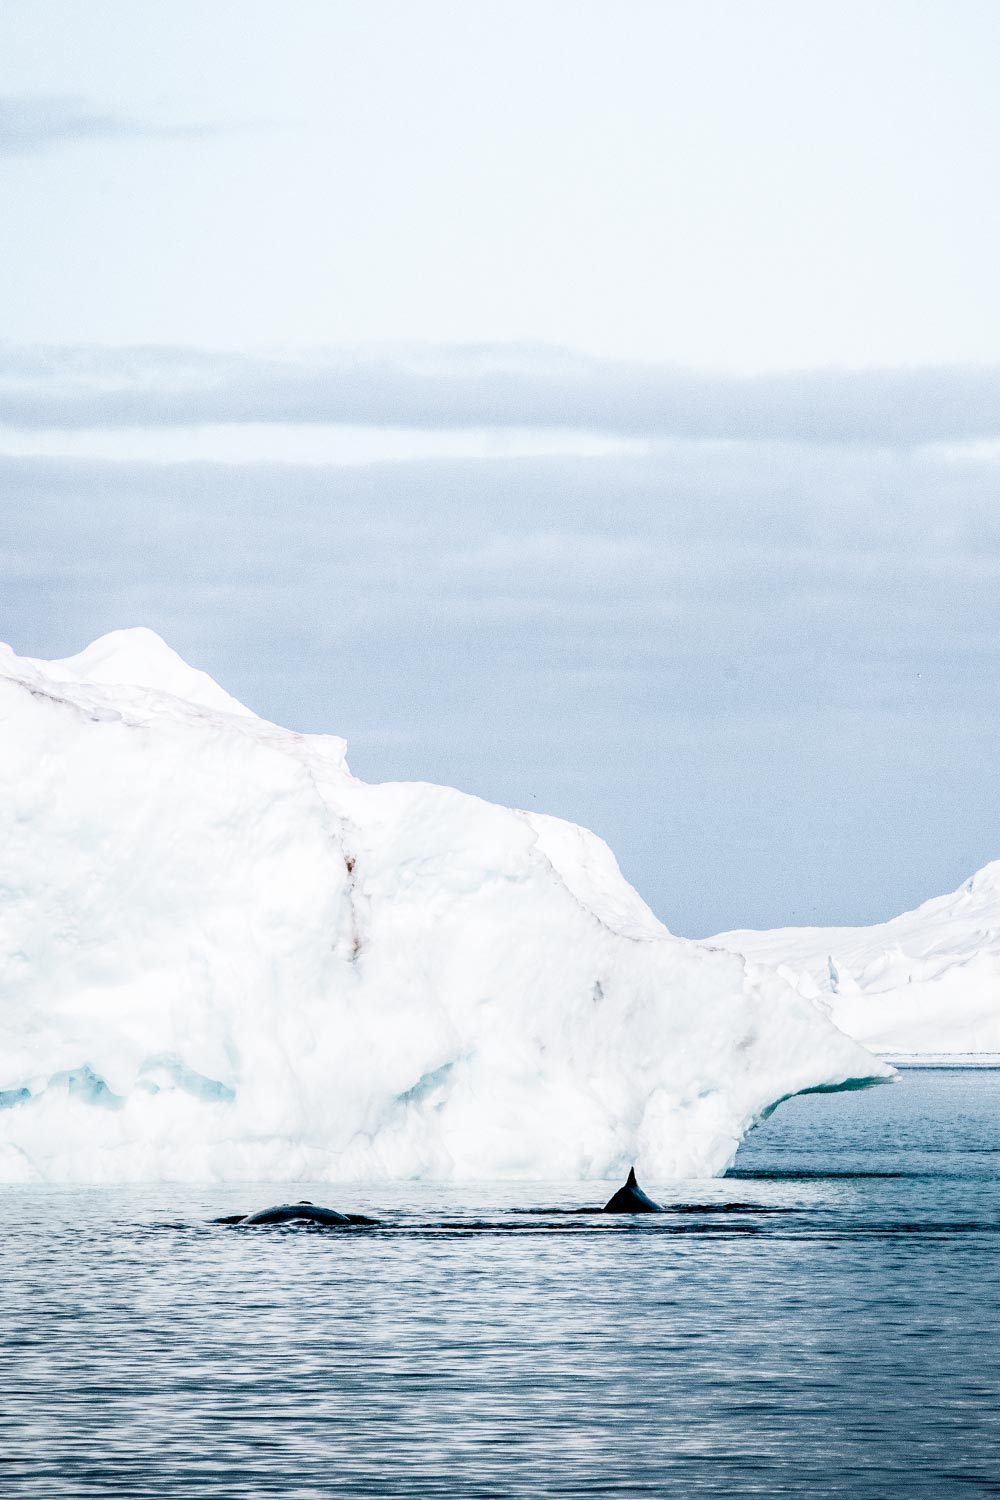 Arctic spectacle of Greenland whale watching – Witness a majestic whales in Ilulissat's pristine waters.